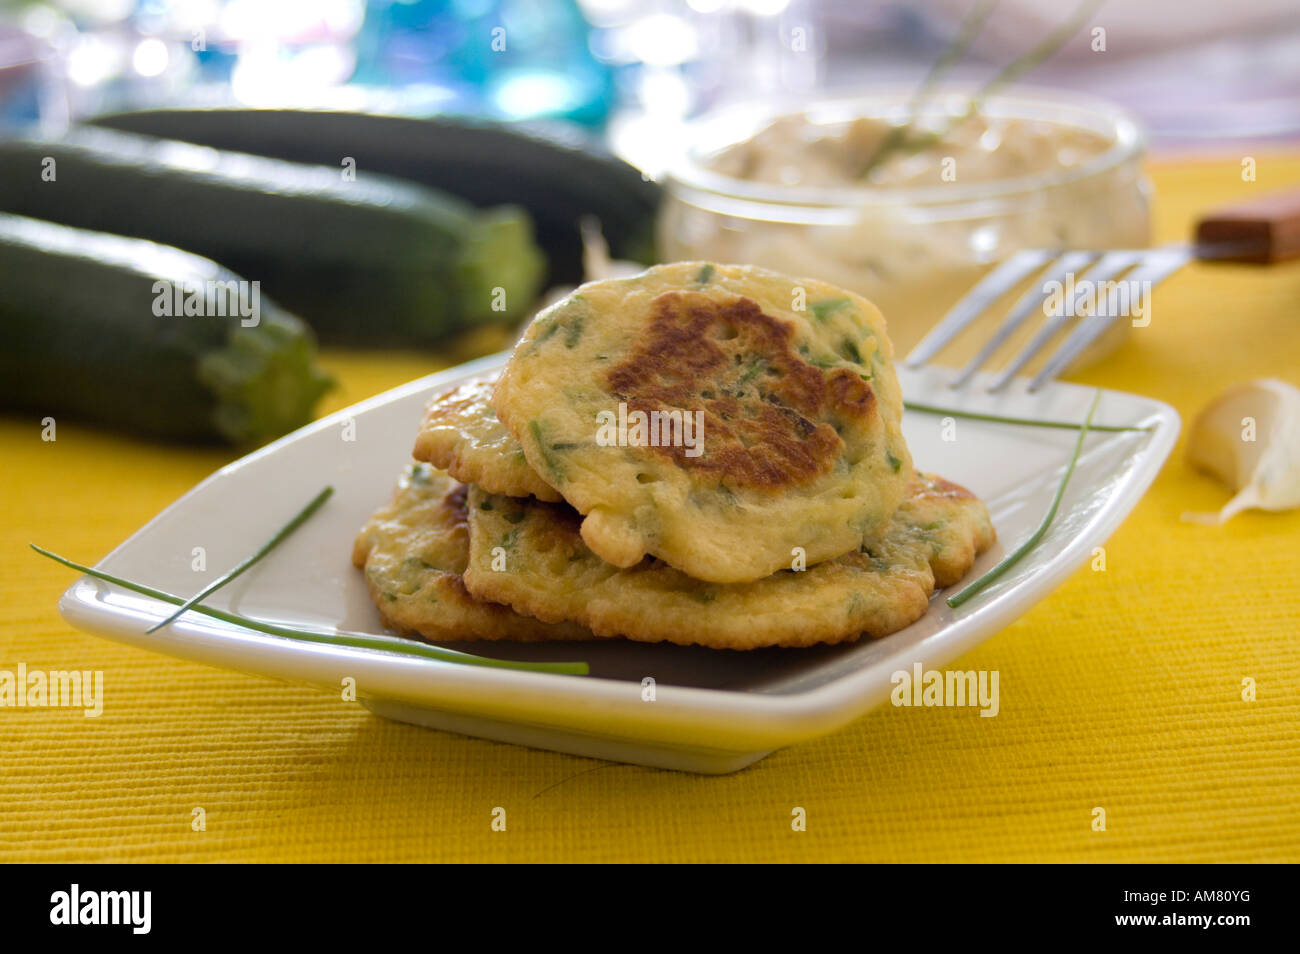 Vegetarian cookies or cakes with courgettes Stock Photo